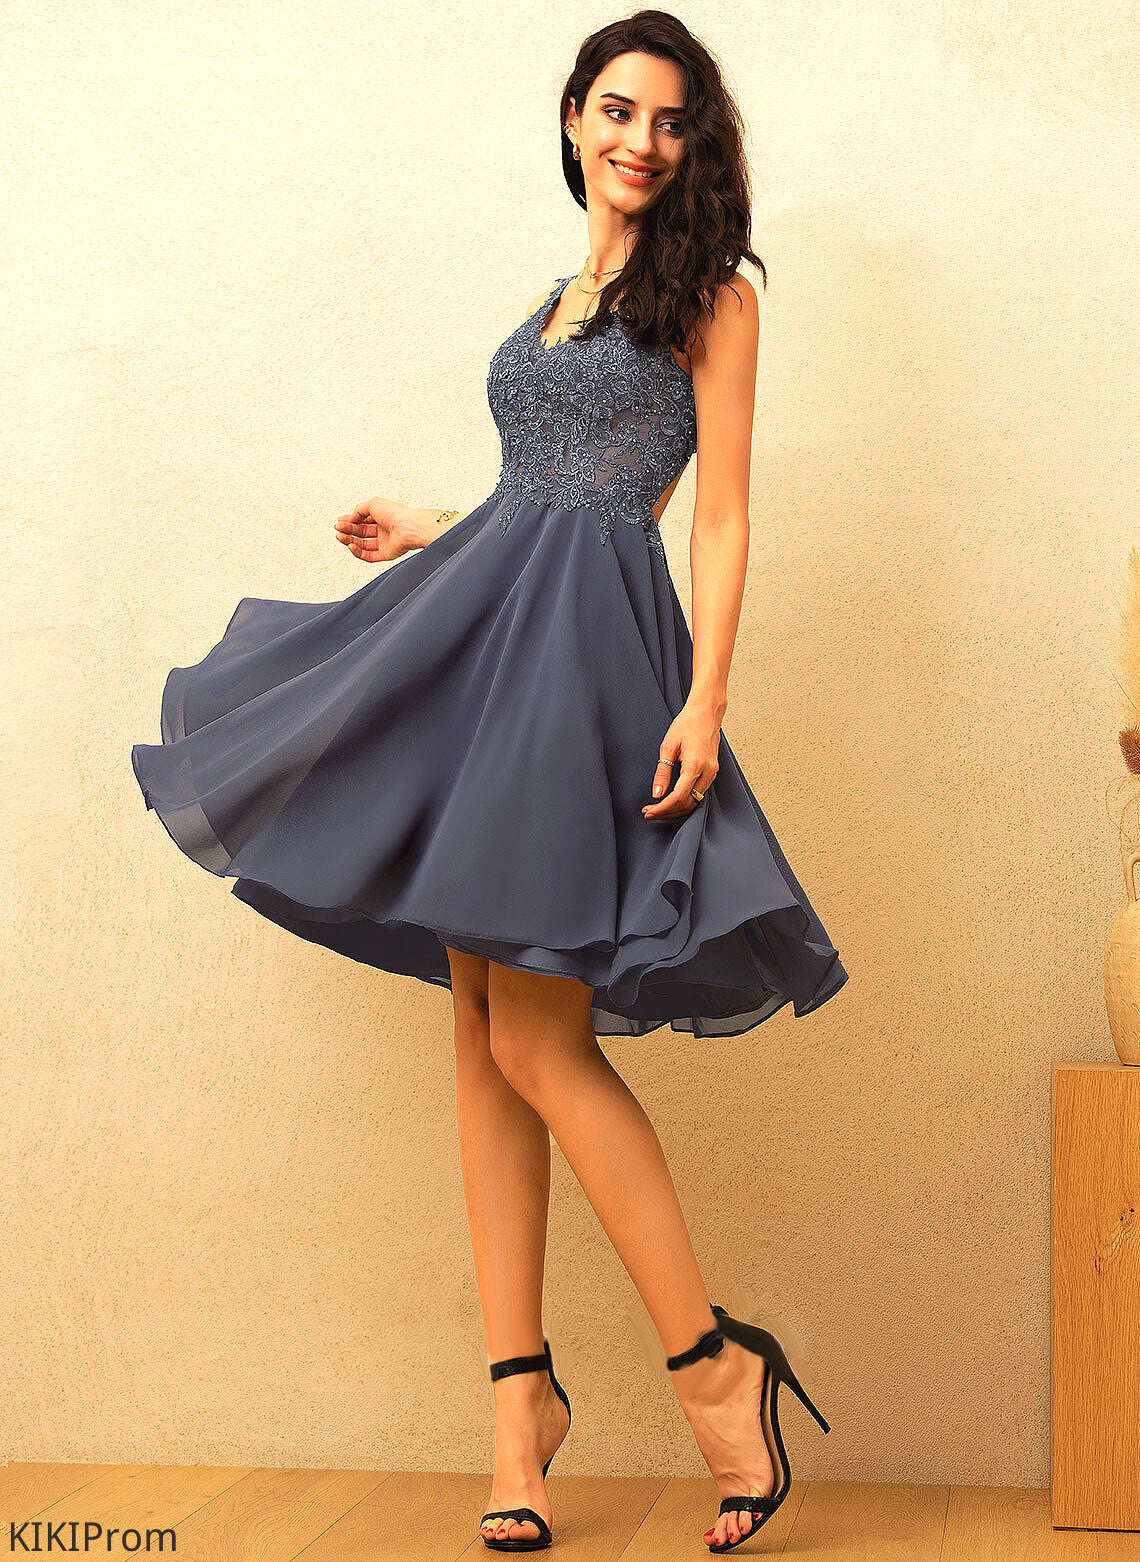 Chiffon Homecoming Dresses A-Line V-neck Homecoming With Beading Knee-Length Lace Dress Kasey